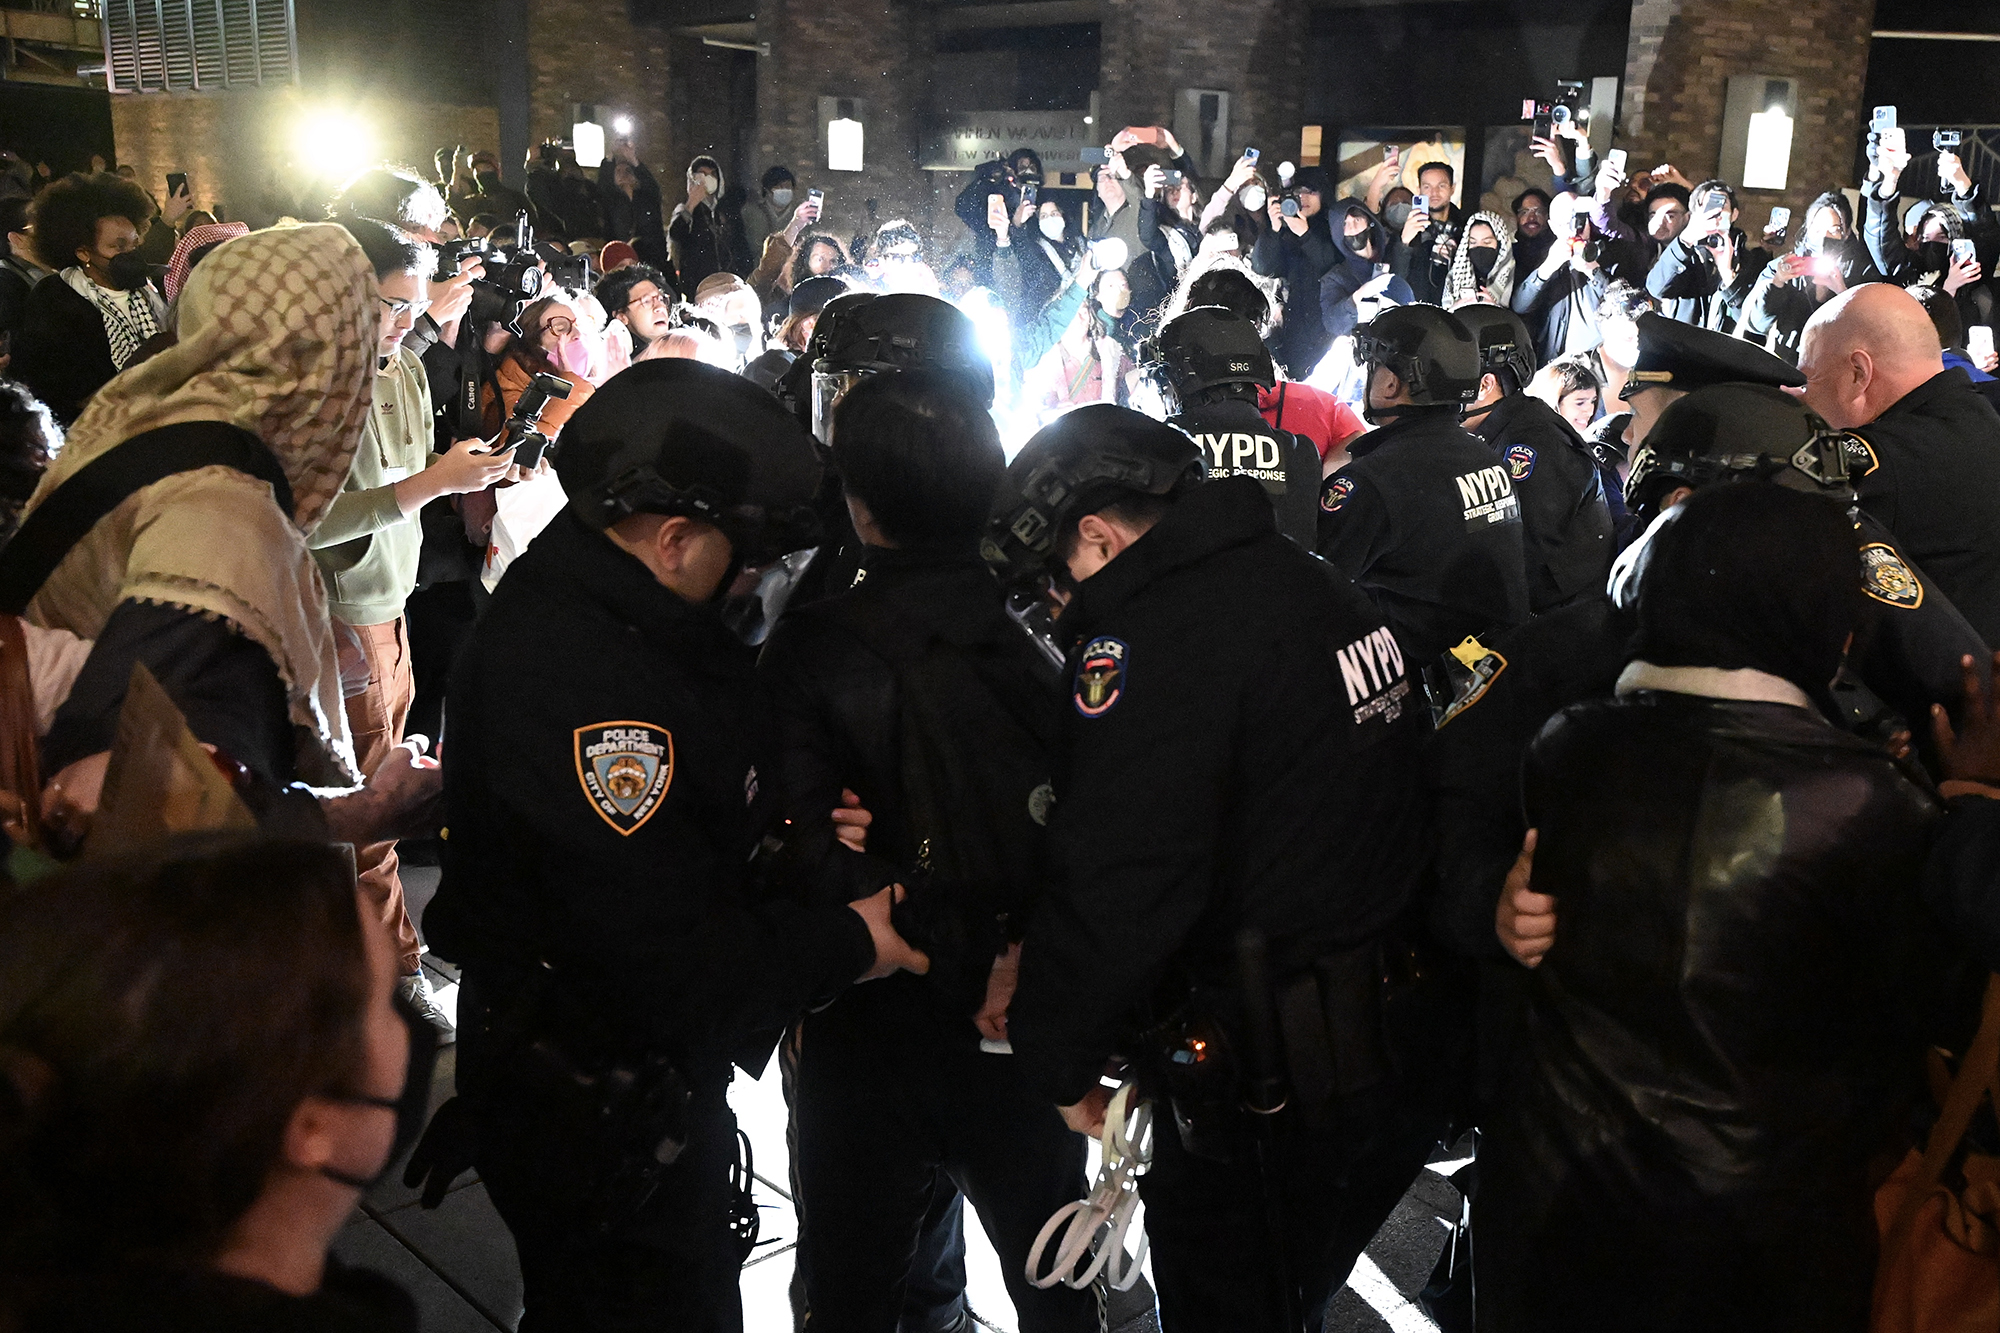 Police intervene and arrest more than 100 students at New York University (NYU) in New York on April 22 during a demonstration on campus in solidarity with the students at Columbia University and to oppose Israel's attacks on Gaza.